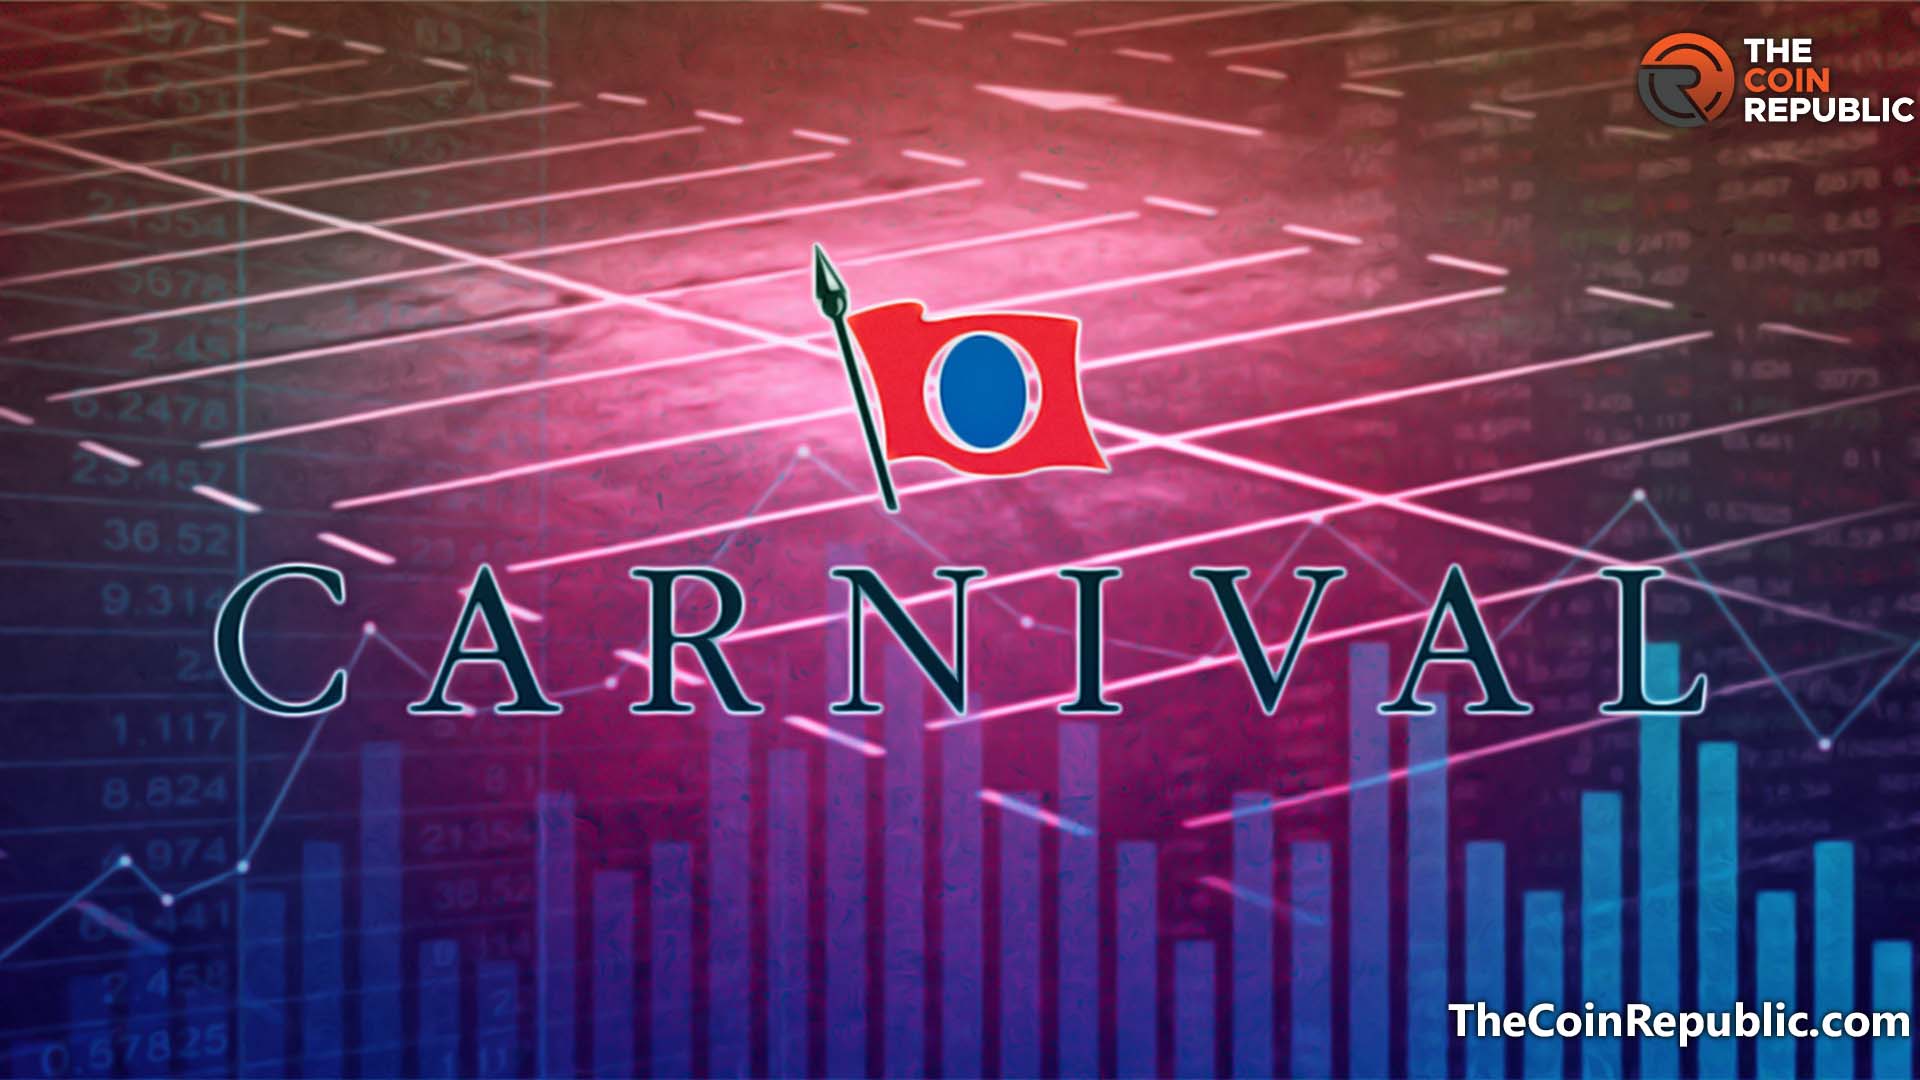 Carnival Stock Price Prediction: CCL Stock Price Gives All The Bullish Sign To Head For $20